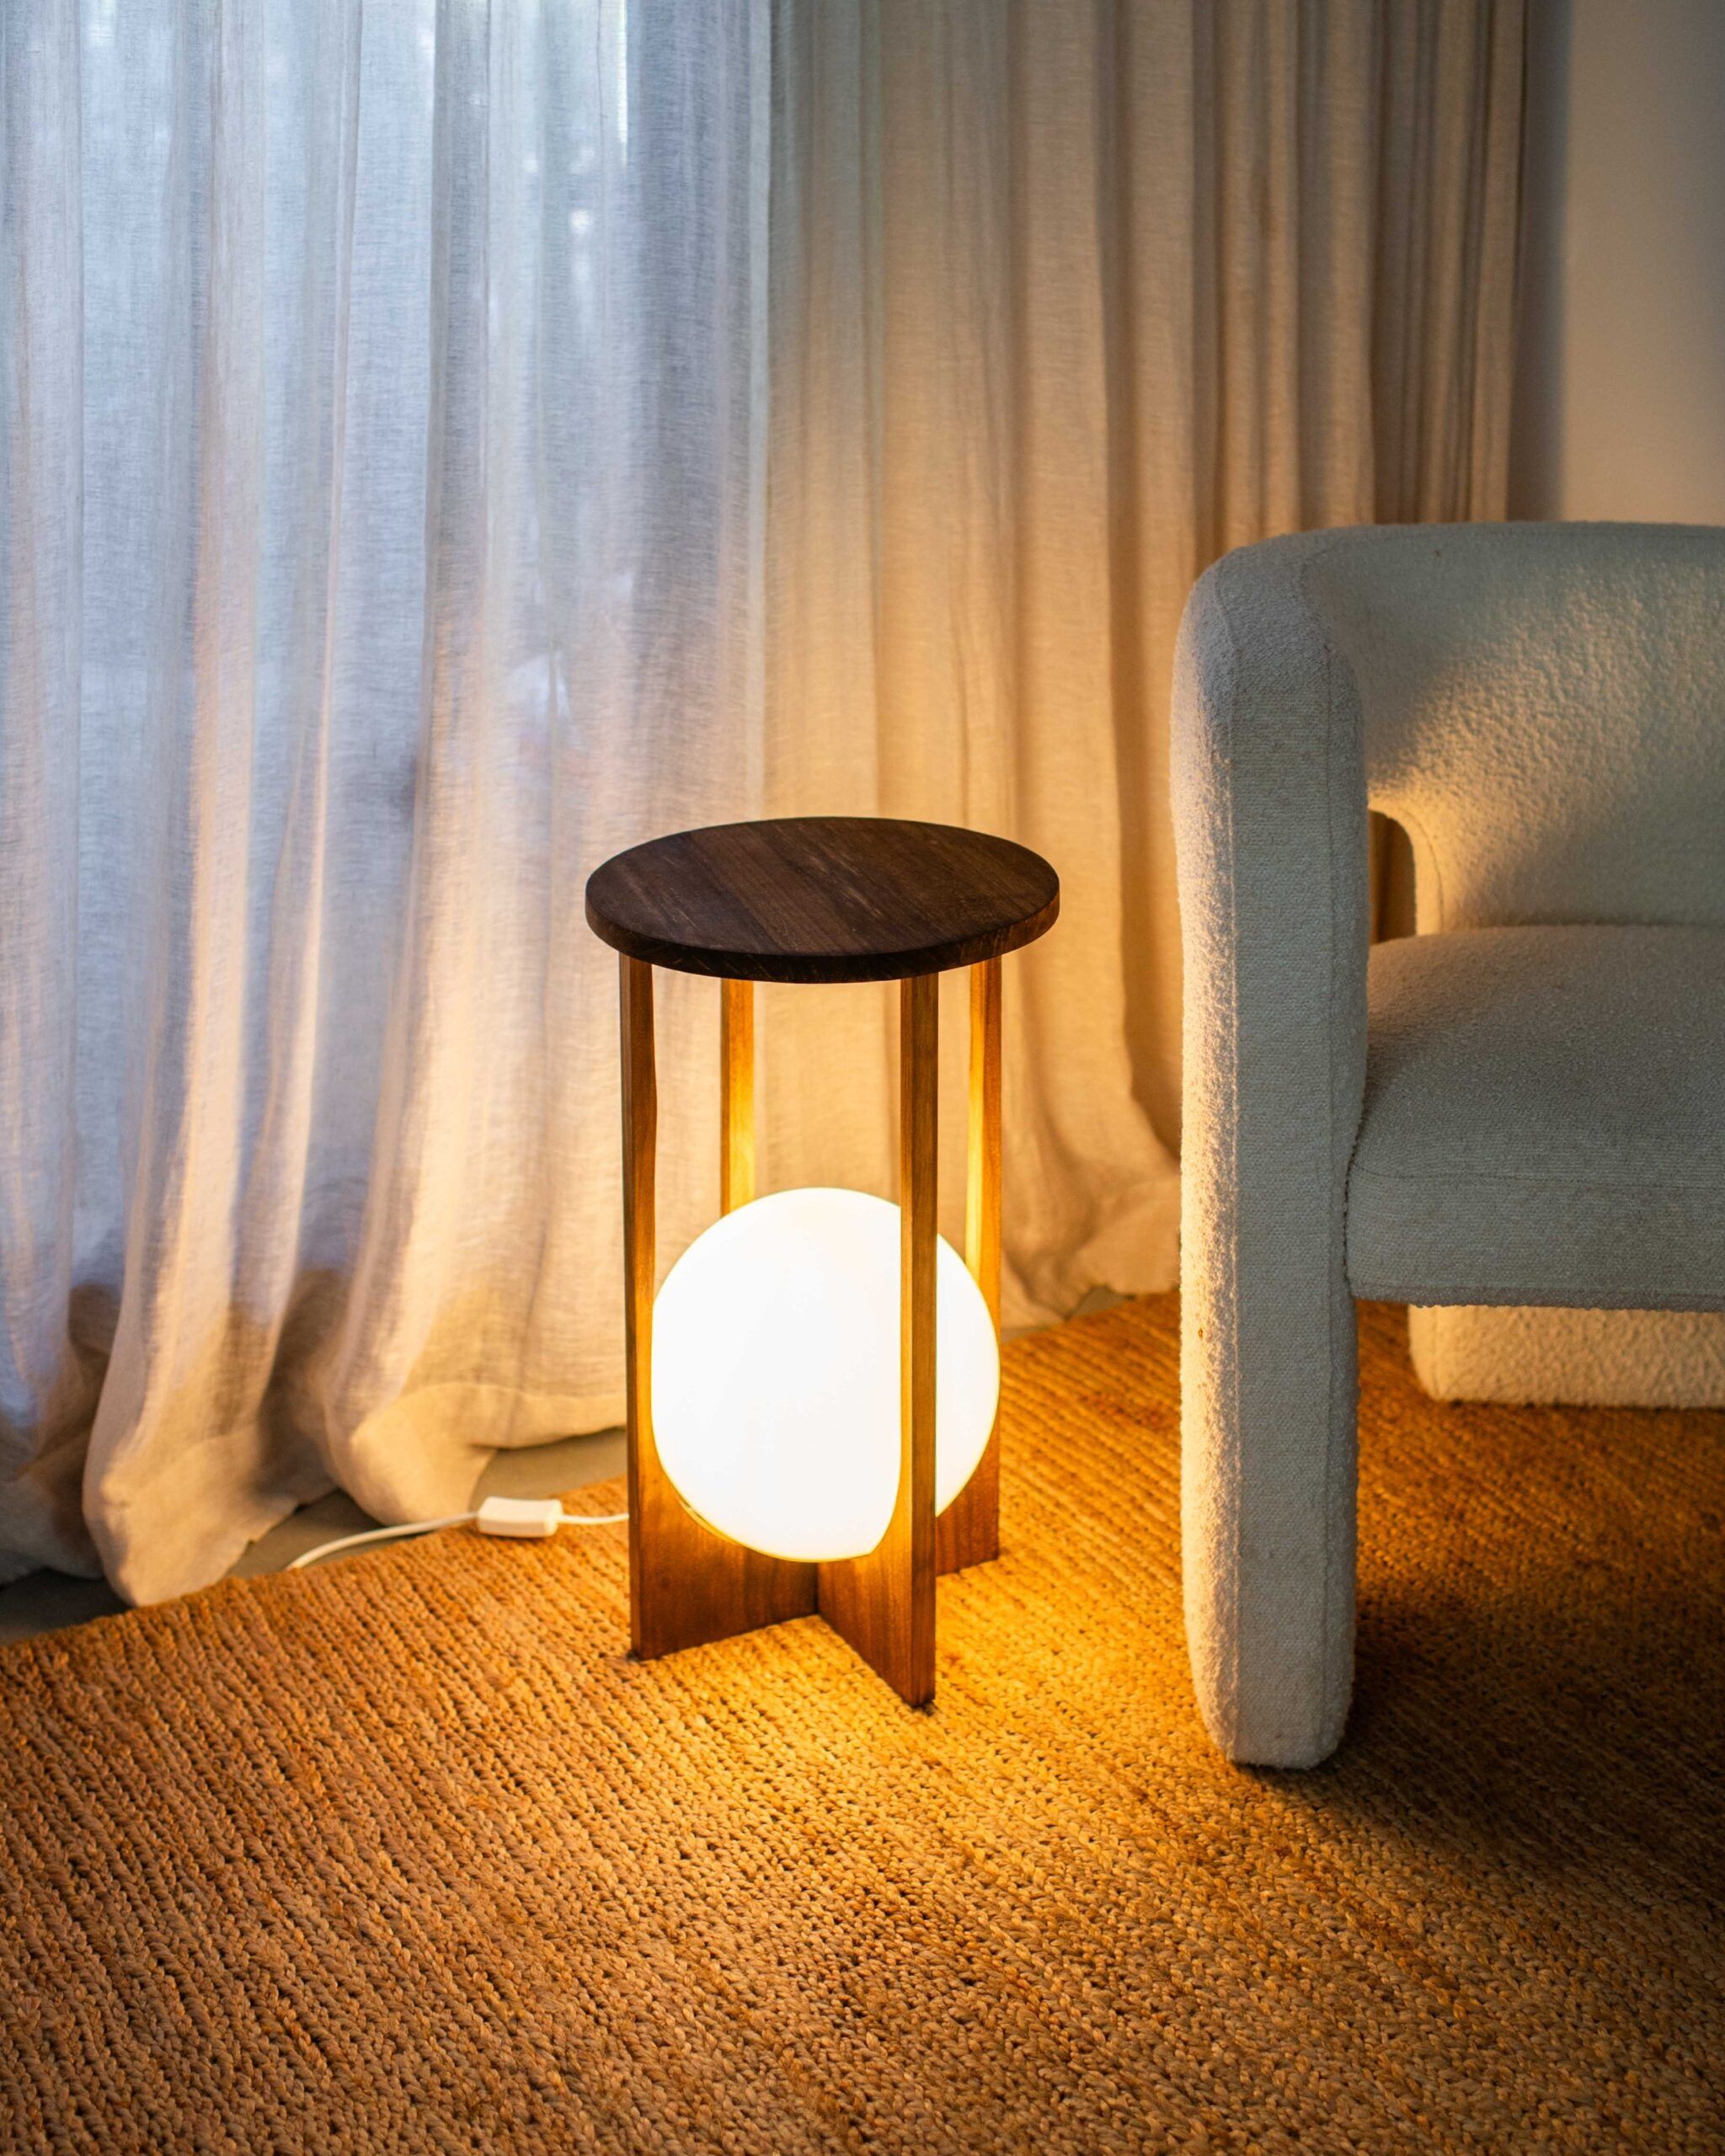 Side Table Lamp Ideas : 6 Unique Side Table Lamp Ideas for Your Home Decor